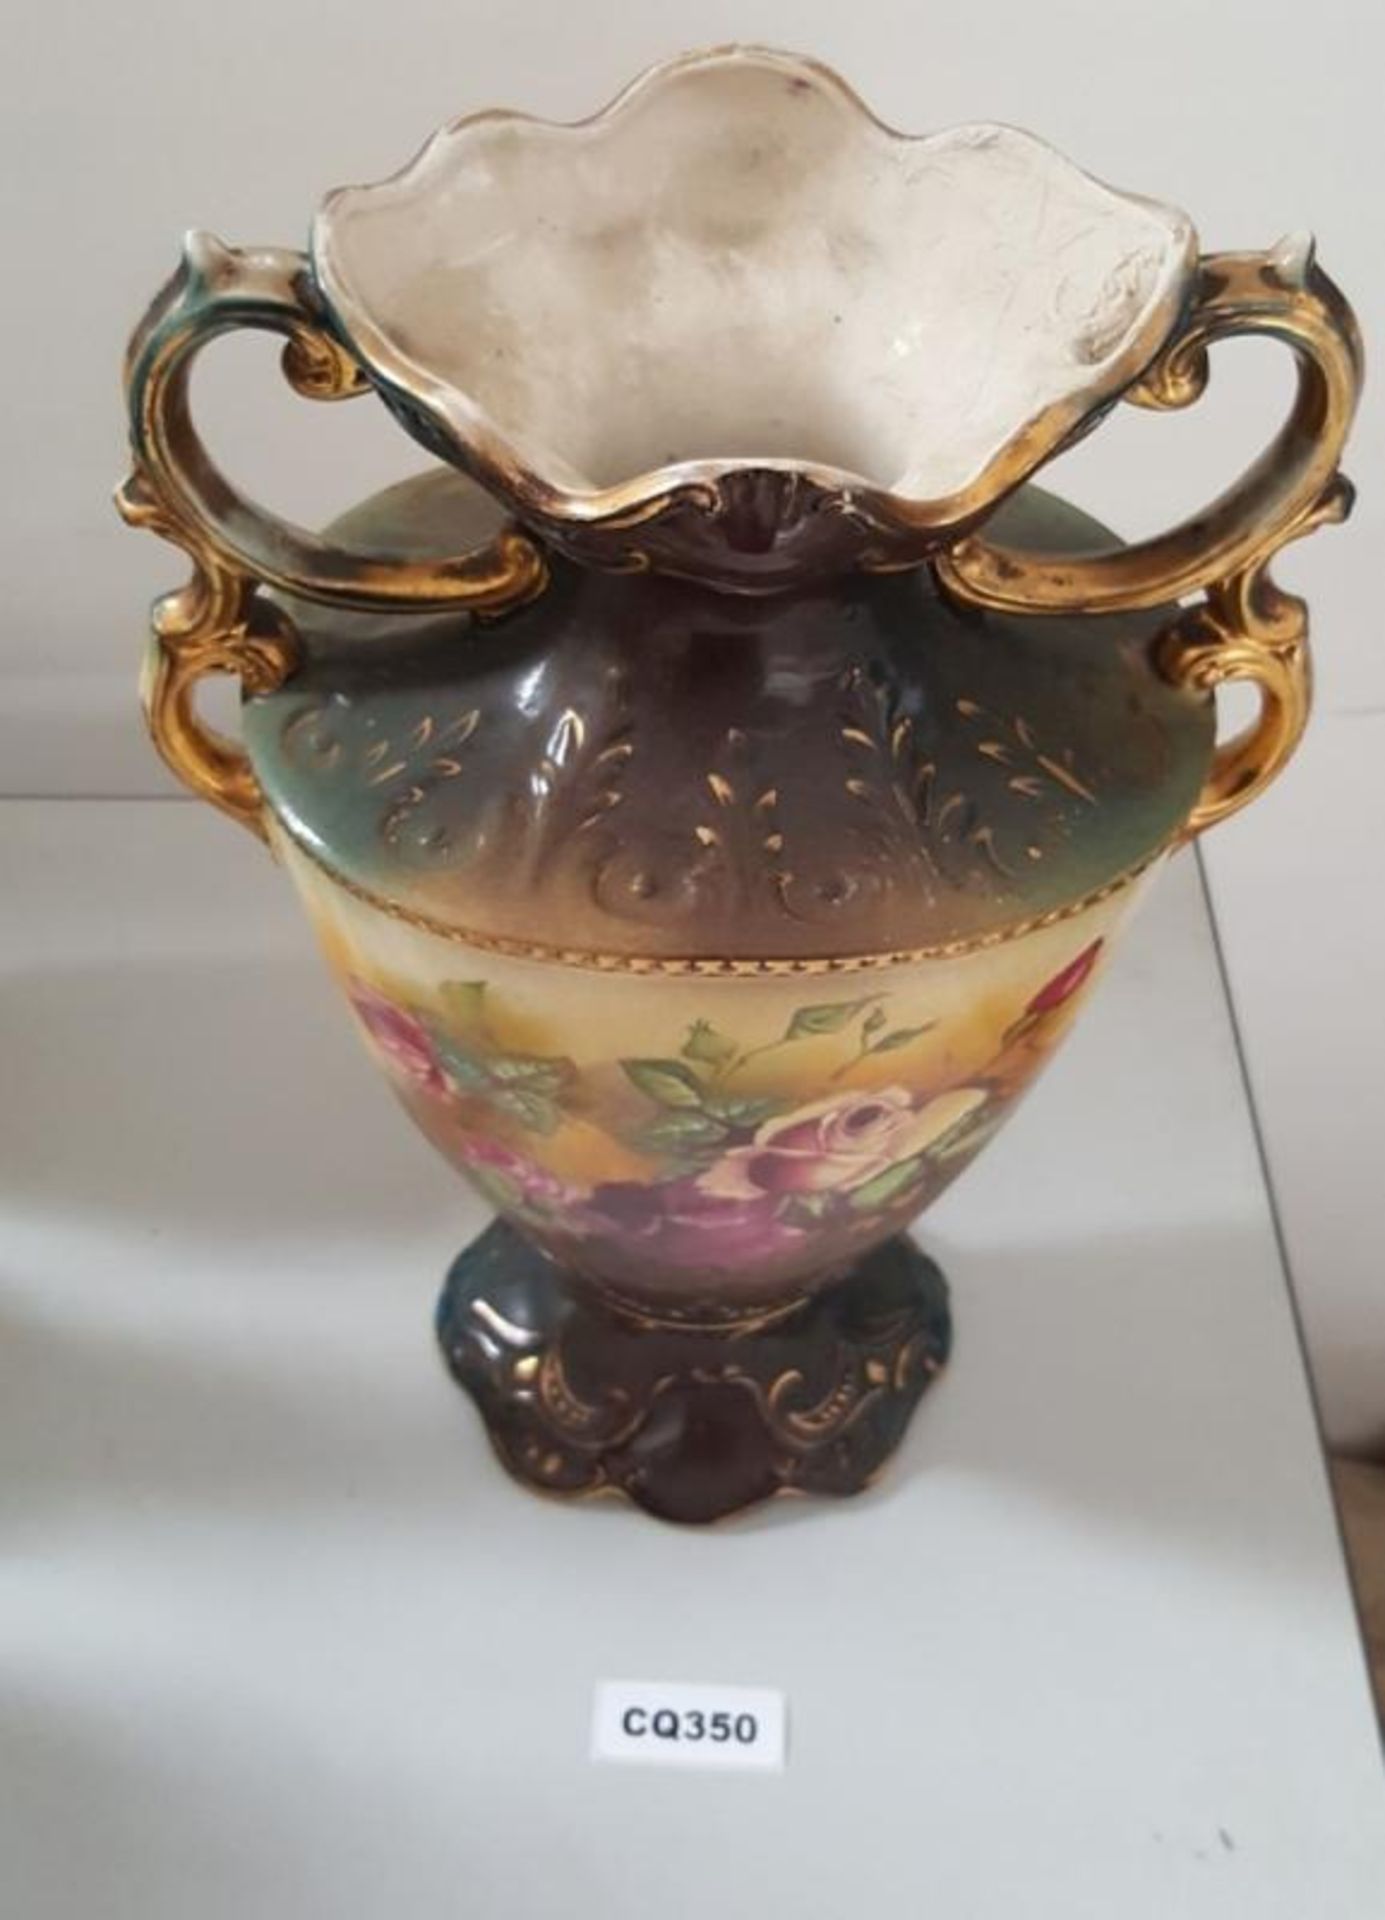 1 x Antique Victorian Porcelain Vase Trophy Shaped In Dark Shade With A Flower Print( Made In Englan - Image 3 of 3